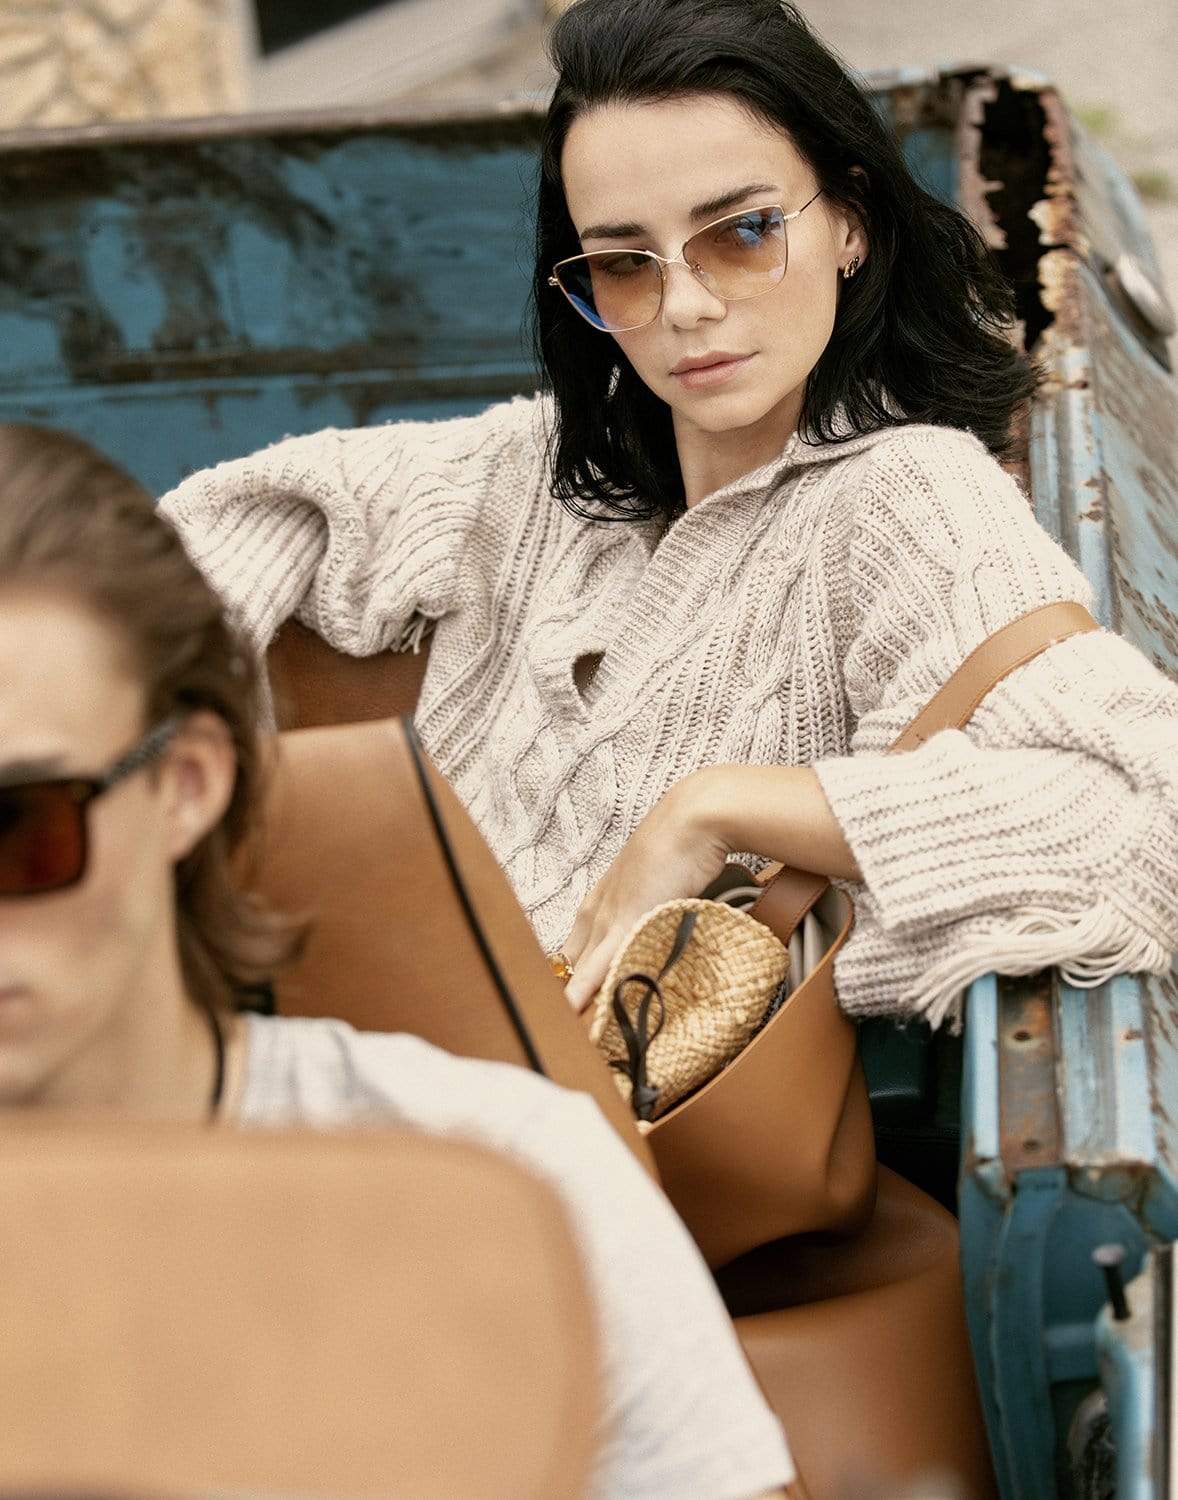 OLIVER PEOPLES-Gold Marlyse Sunglasses-GOLD